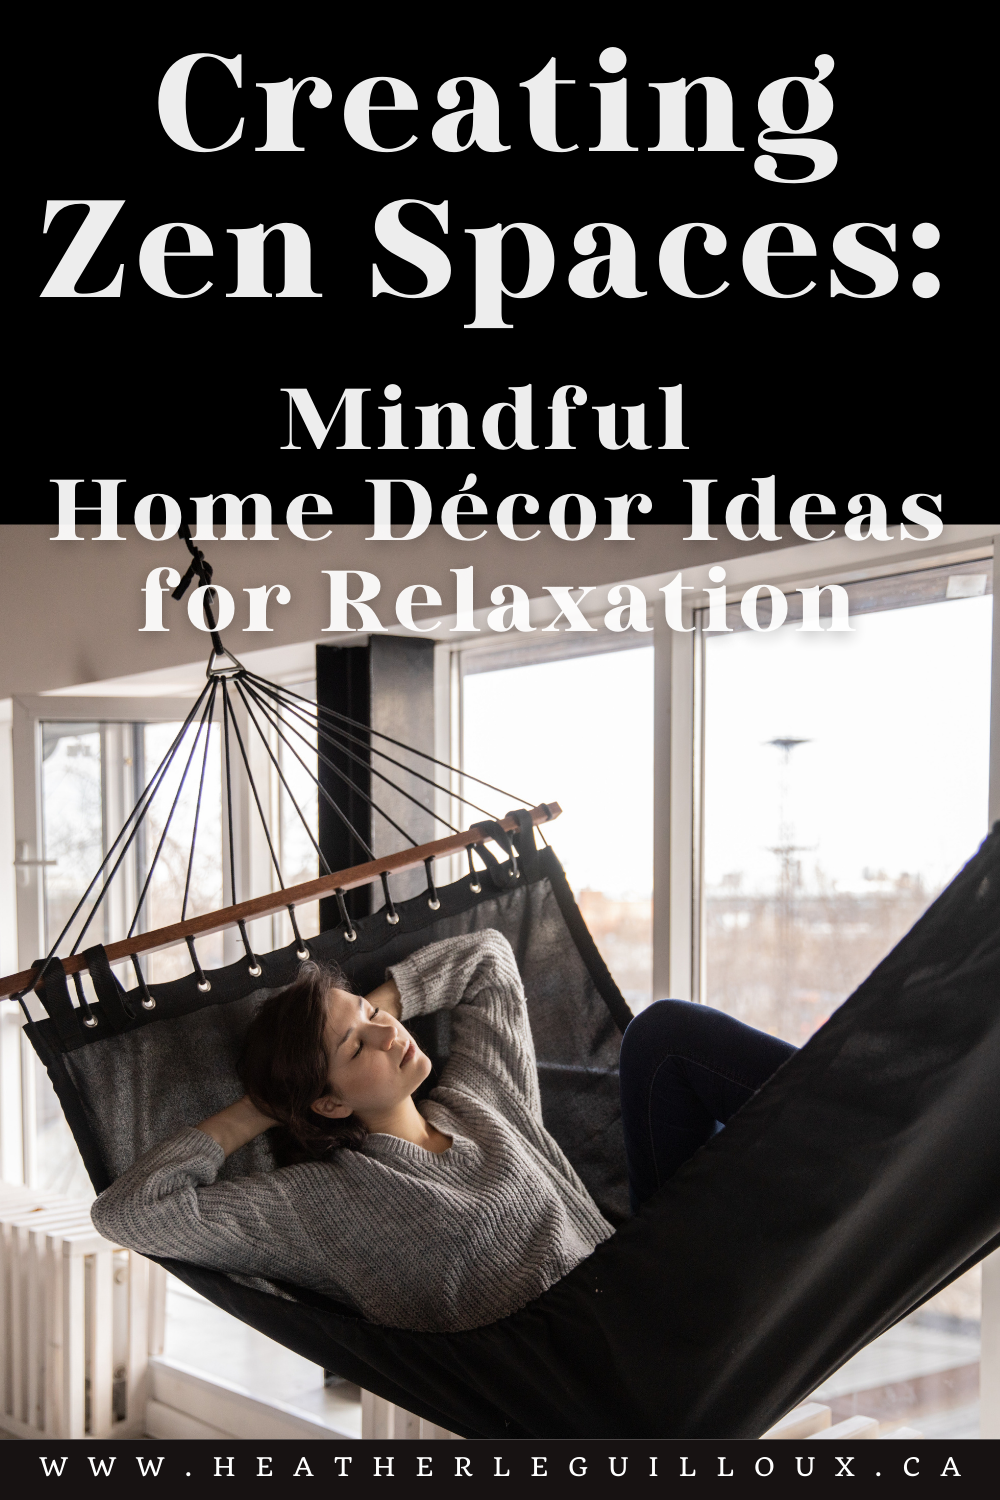 The journey into mindful home décor seeks to transform mere living spaces into sanctuaries of peace. Each element, carefully chosen and thoughtfully placed, contributes to an atmosphere that beckons you to unwind, let go, and embrace the stillness within. #zen #homedecor #mindfulness #athome